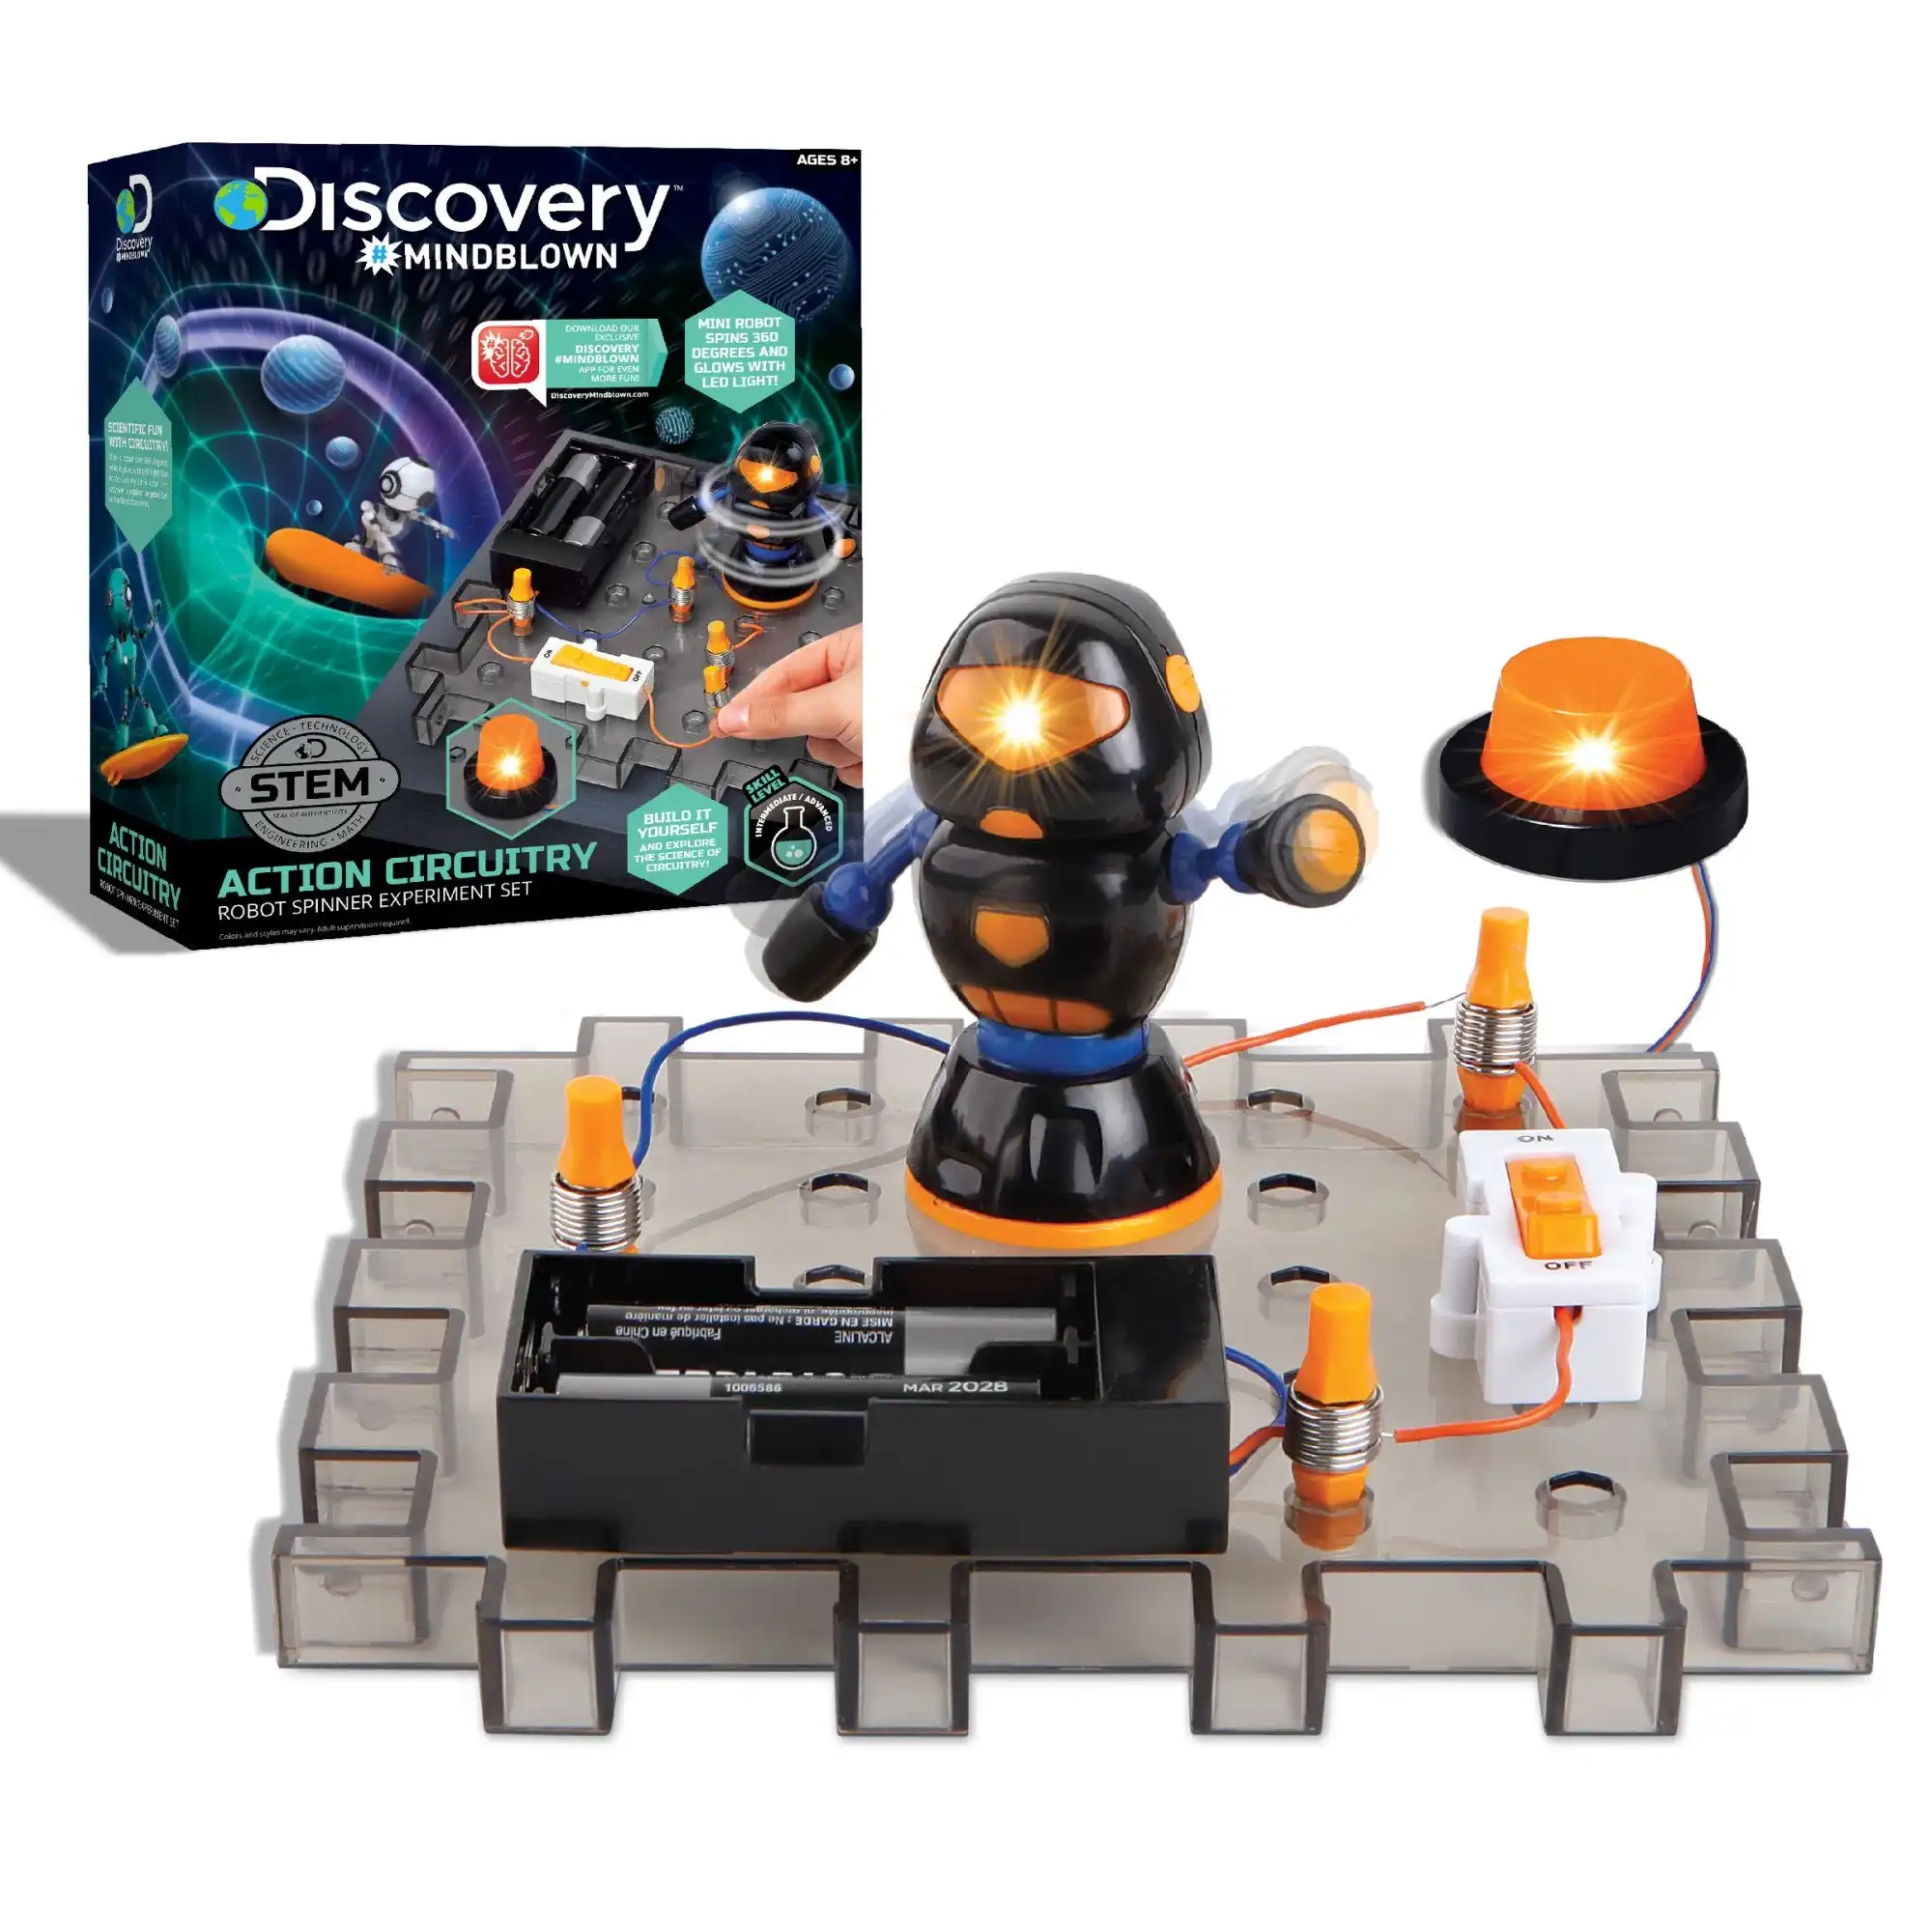 Discovery #MINDBLOWN Circuitry Action Experiment Robot Spinner